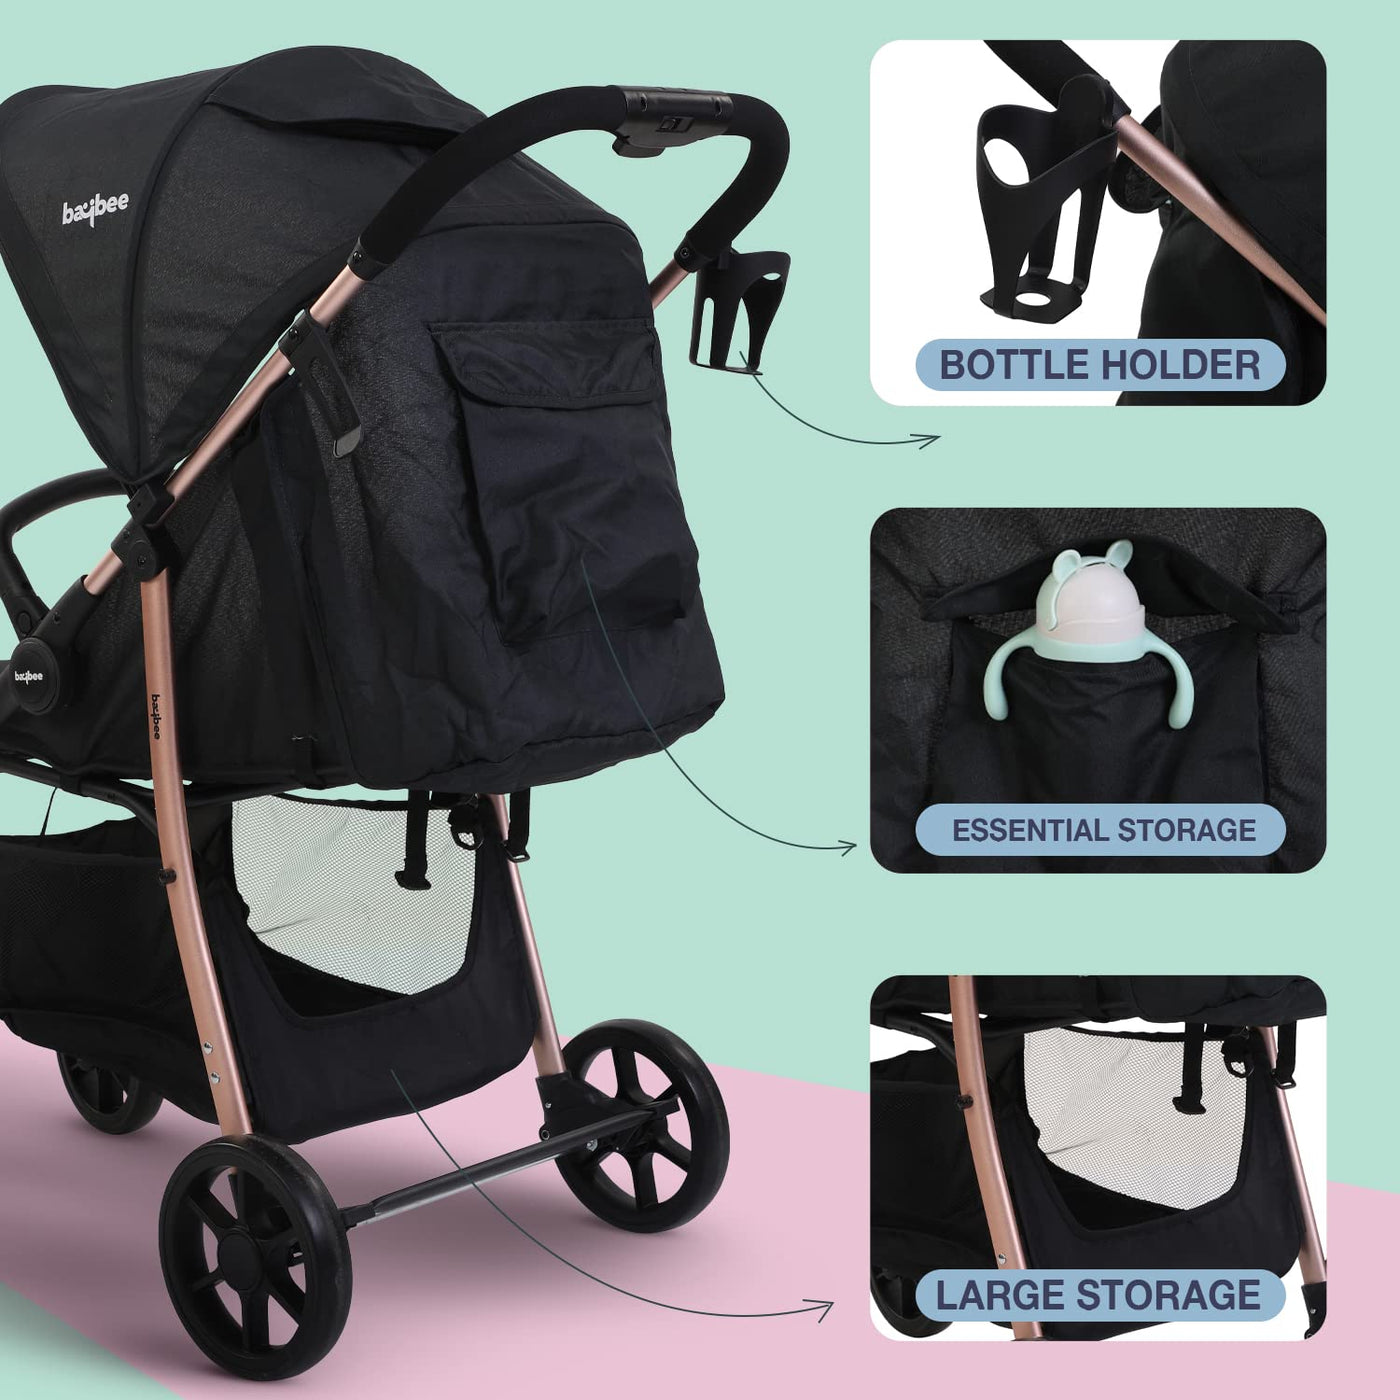 Bebestilo  Baby accesories, Baby stroller reviews, New baby products